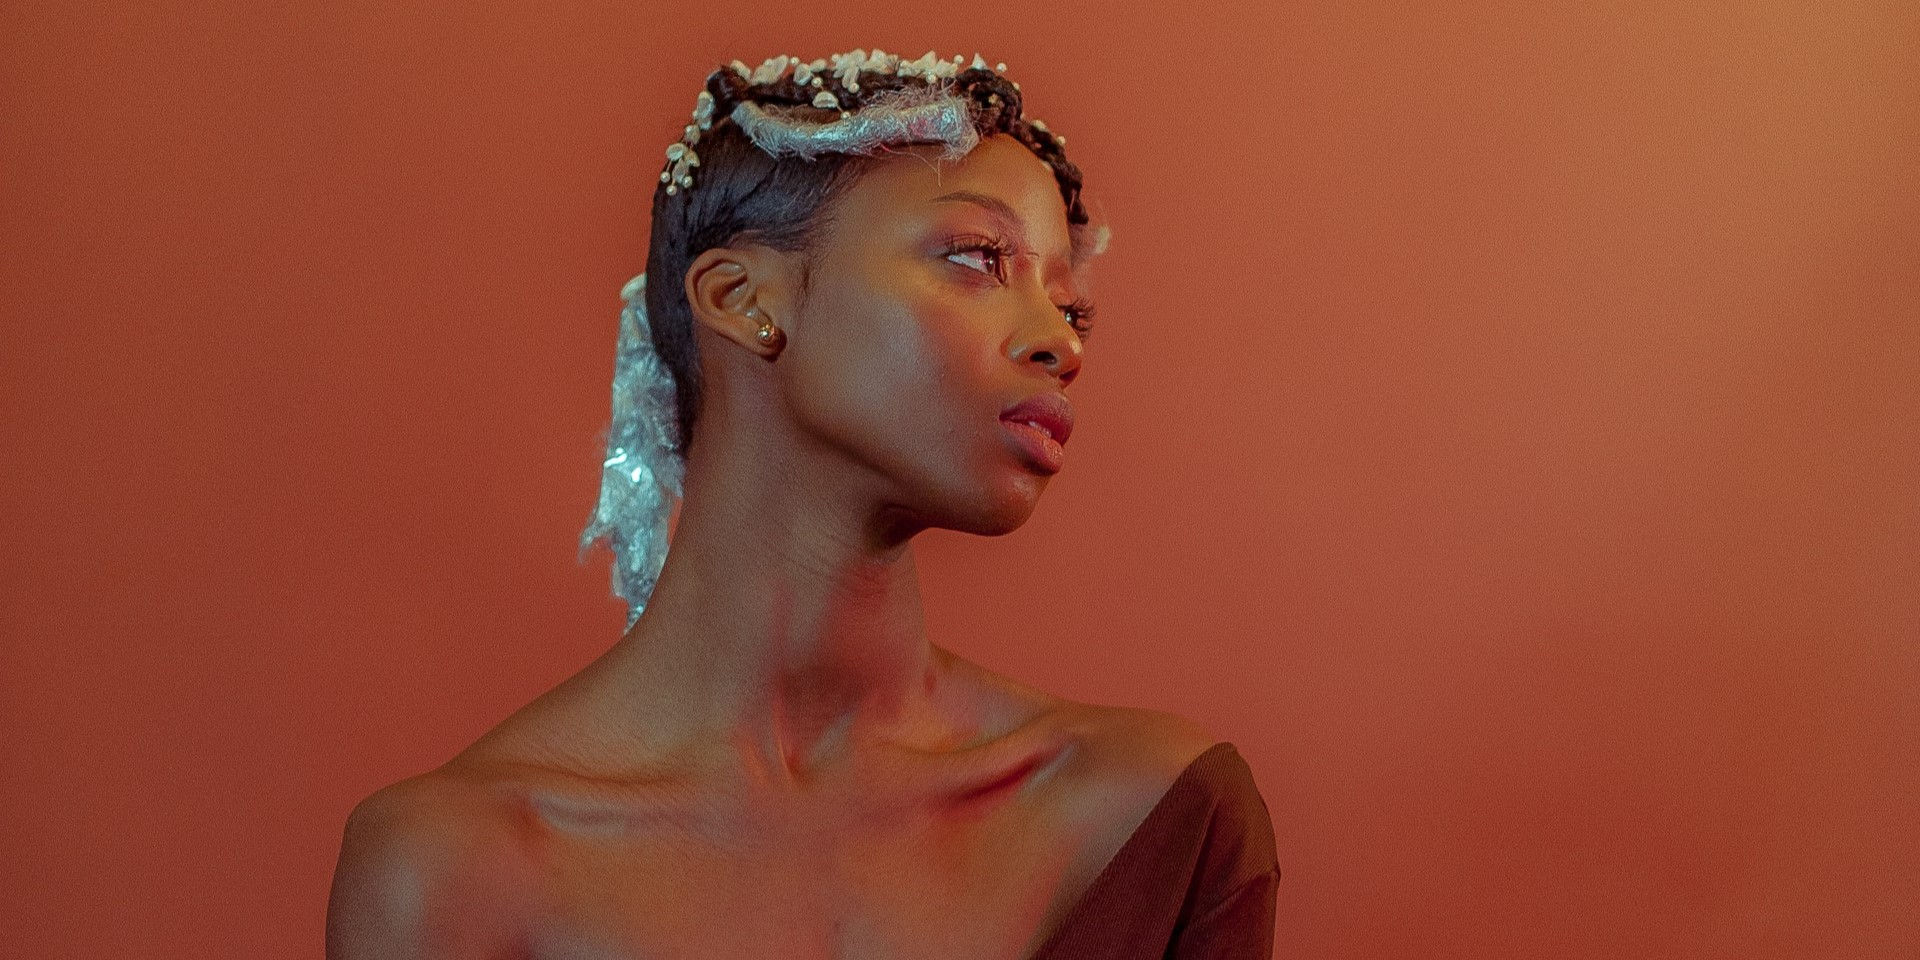 Shooting Black Models with Warm Light